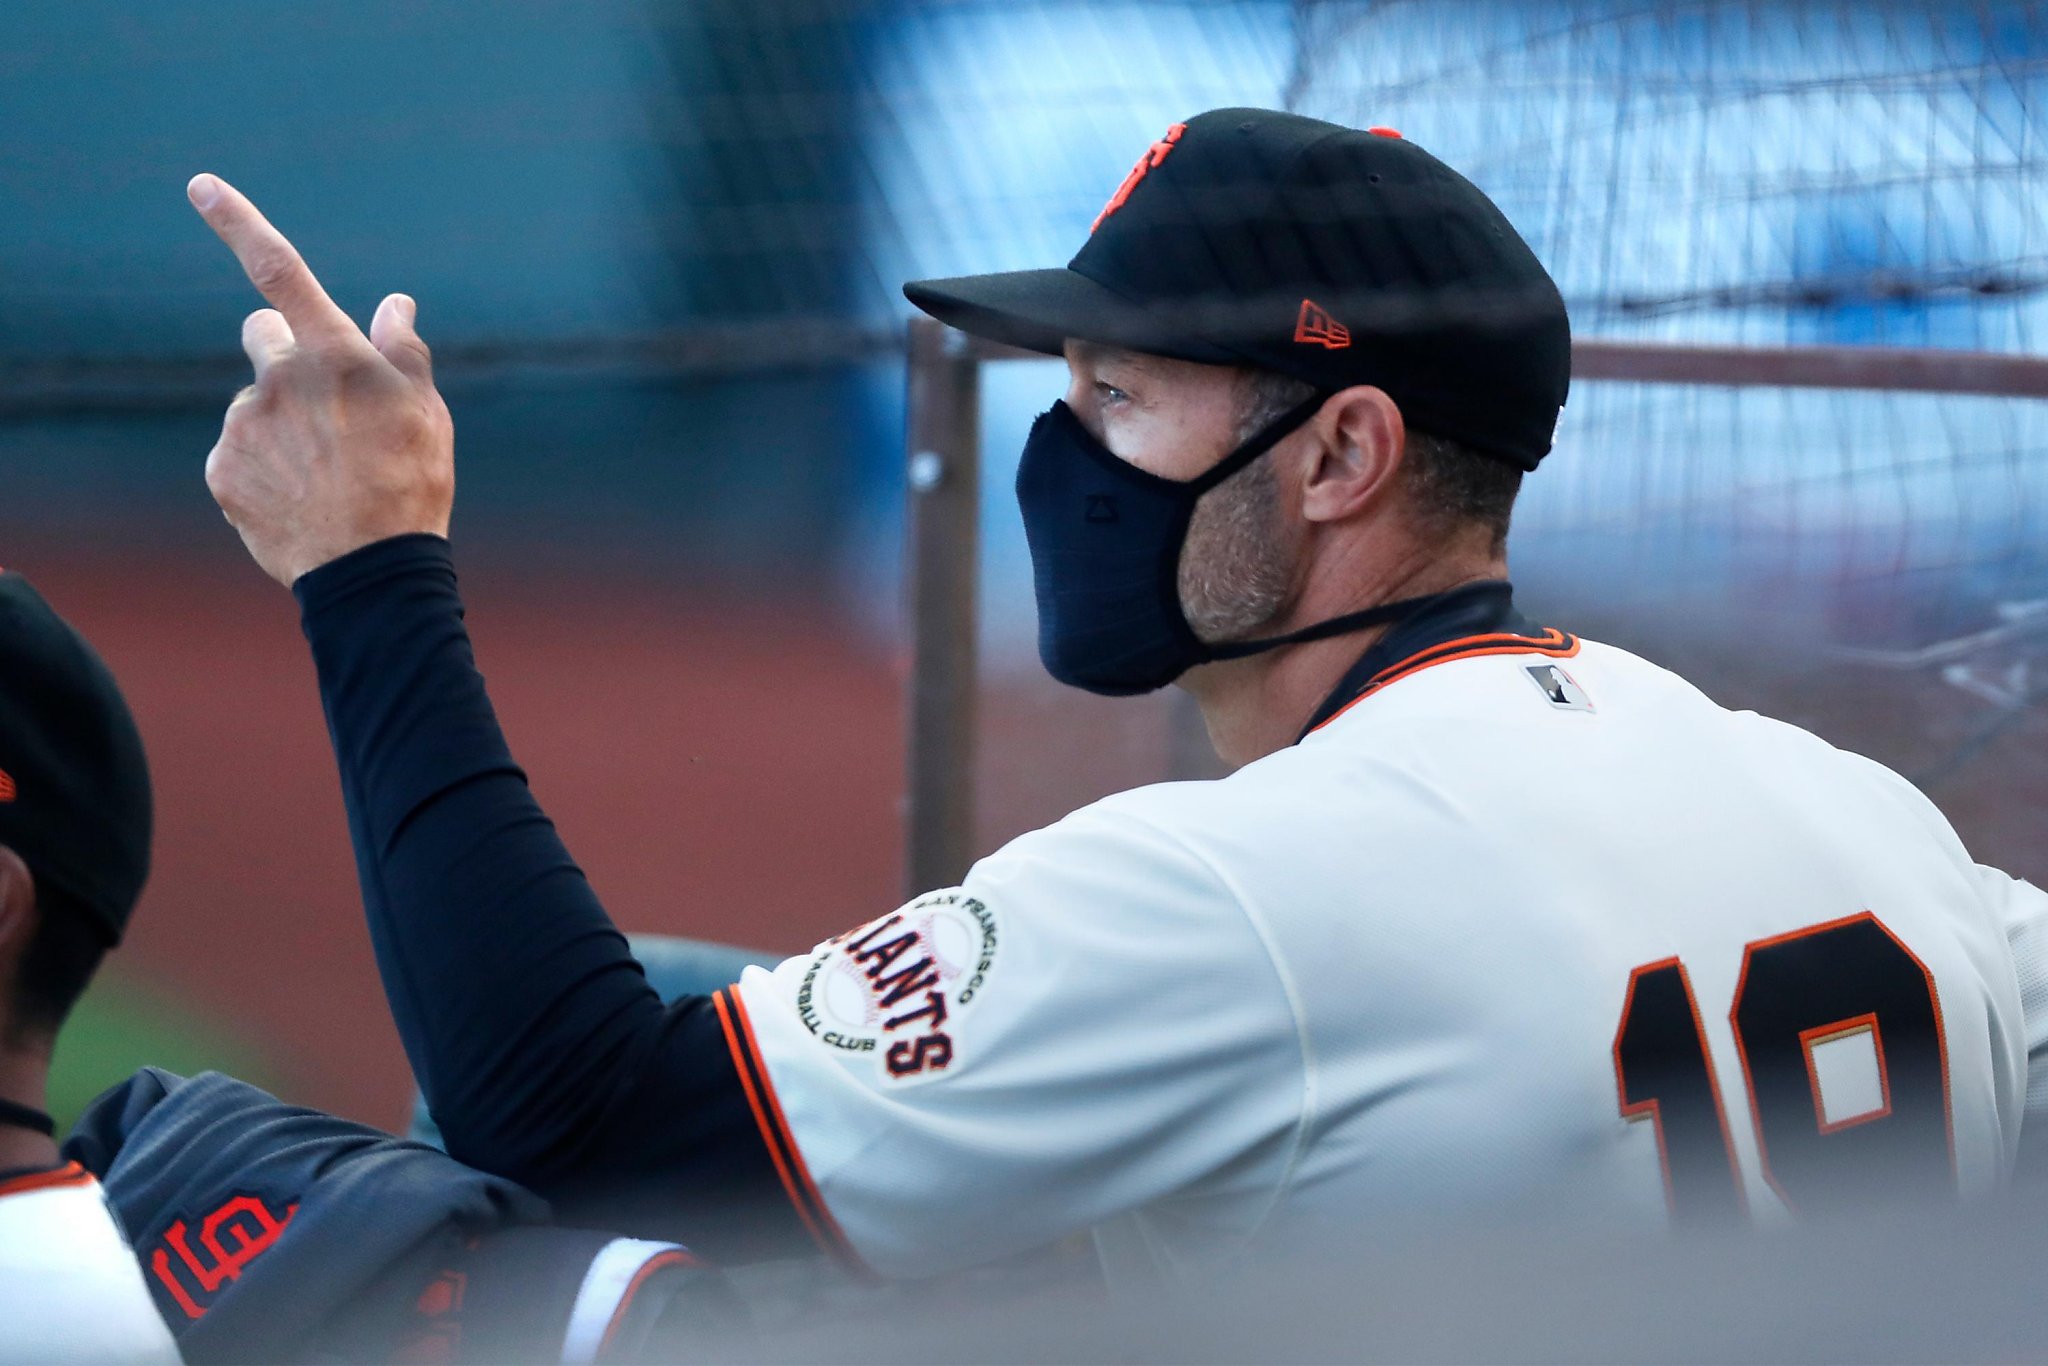 Mike Yastrzemski shares why he is excited about Giants' roster, keys to  regaining 2020 form